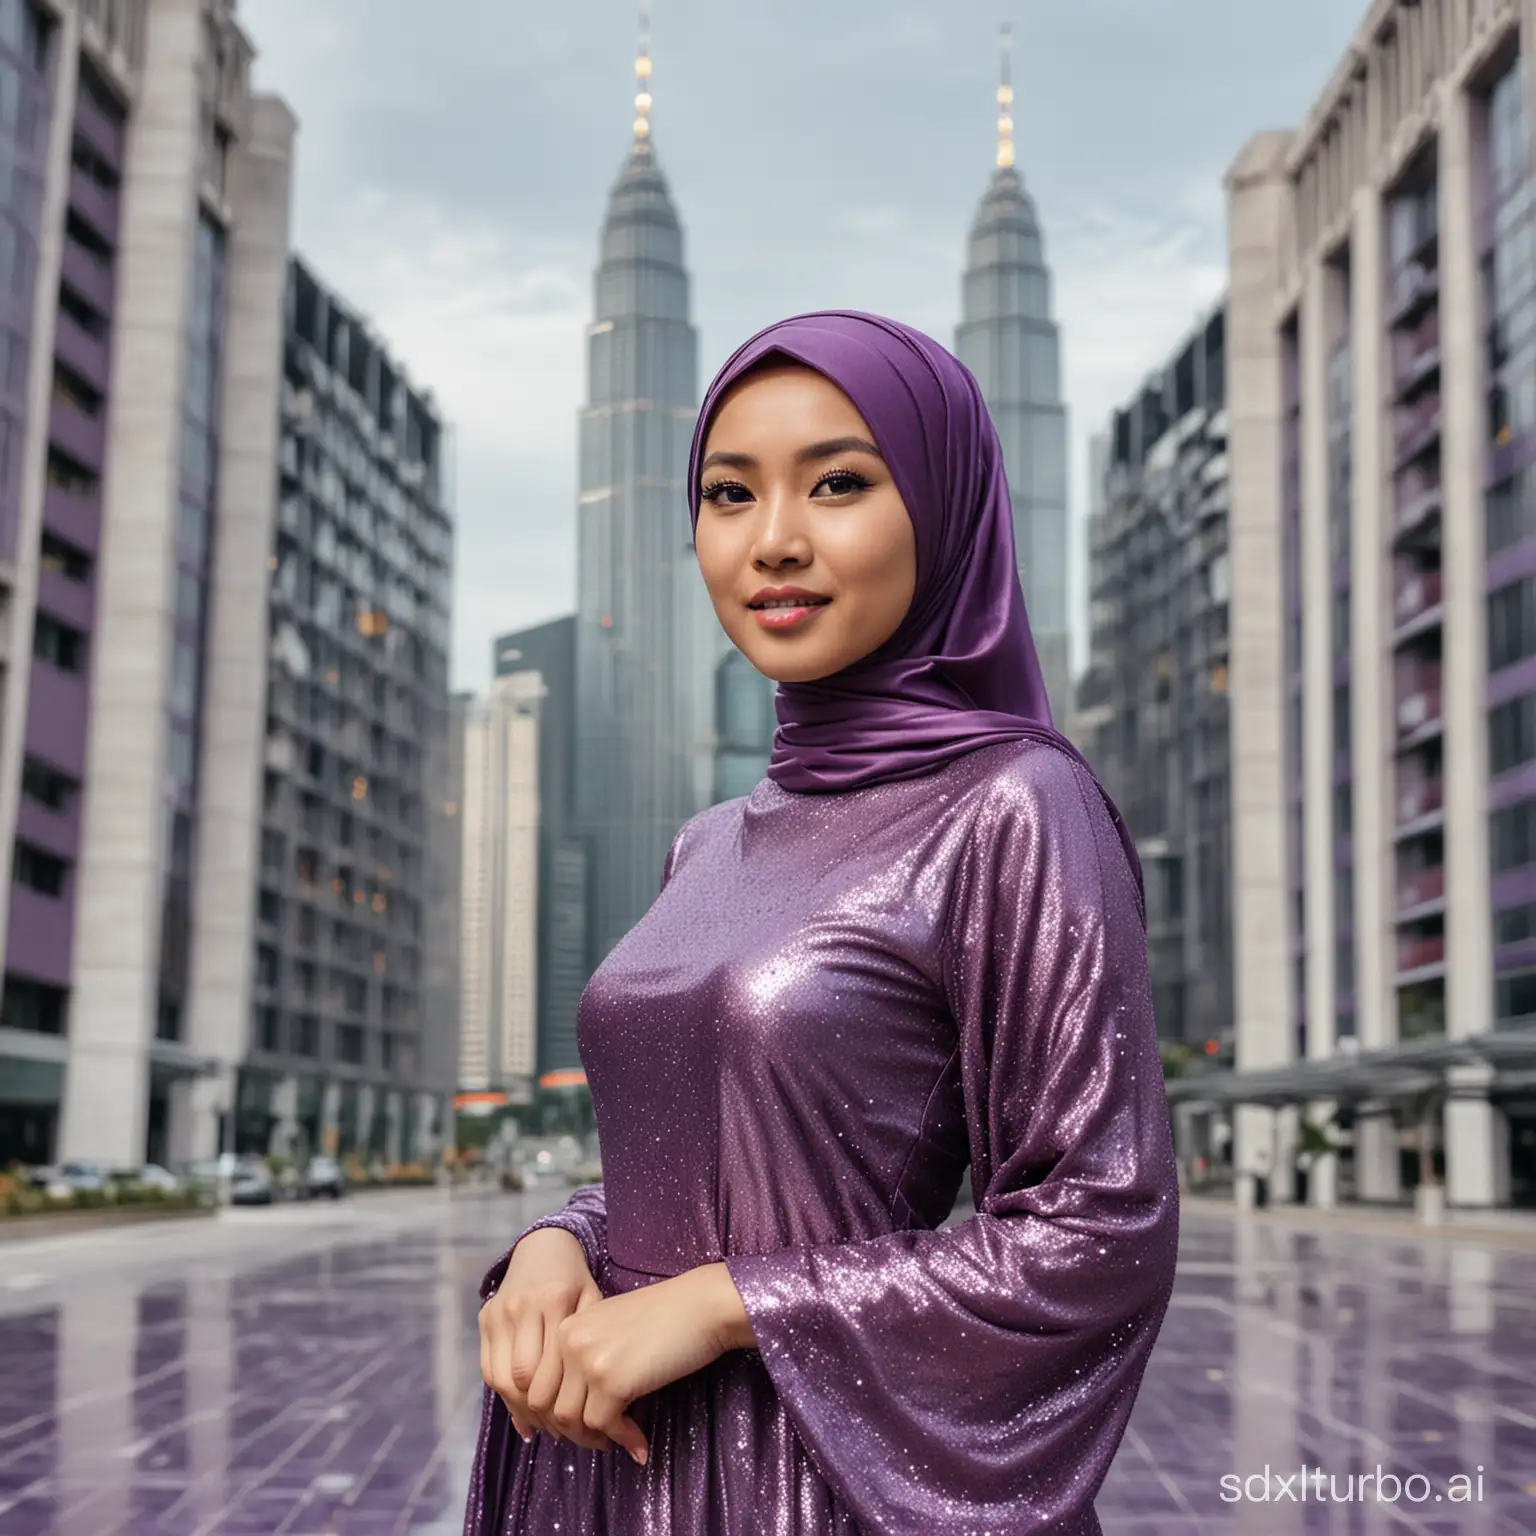 Portrait of an Asian woman, hijab, in a luxurious purple Shimmer dress, standing in the twin buildings of Malaysia